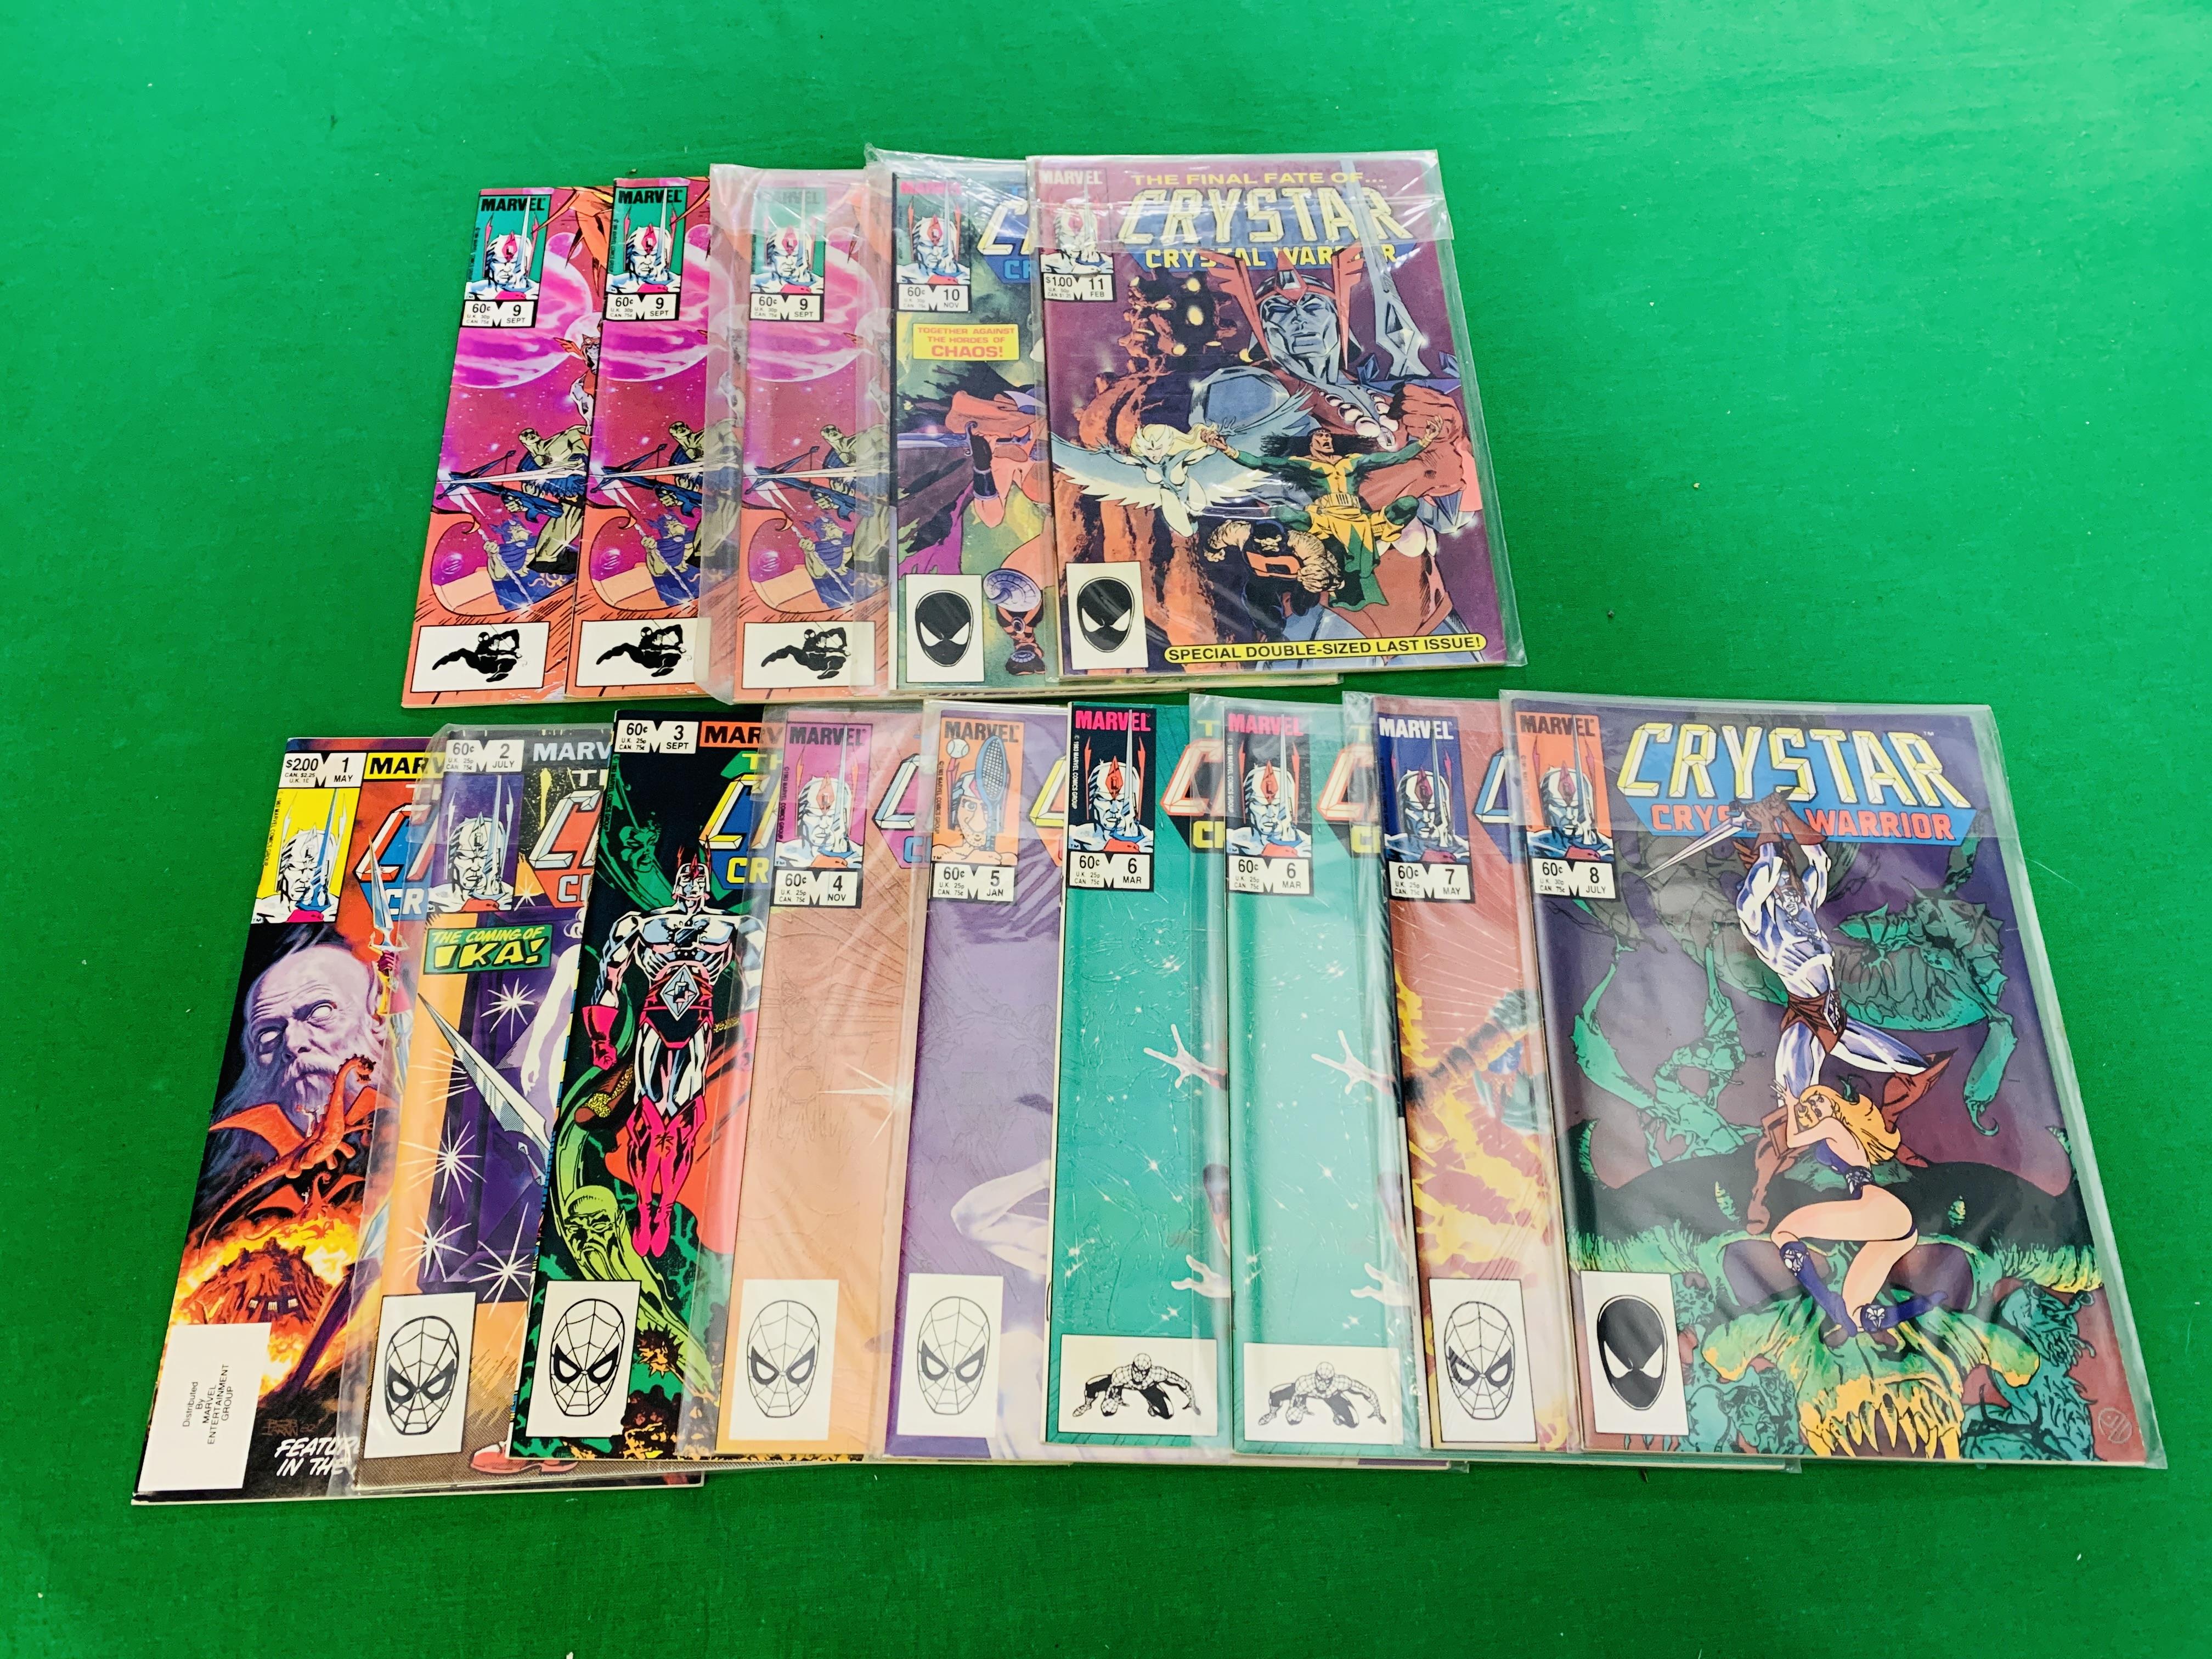 MARVEL COMICS CRYSTAR CRYSTAL WARRIOR NO. 1 - 11 FROM 1983, COUPLE OF DUPLICATES, INCLUDES NO. 8.